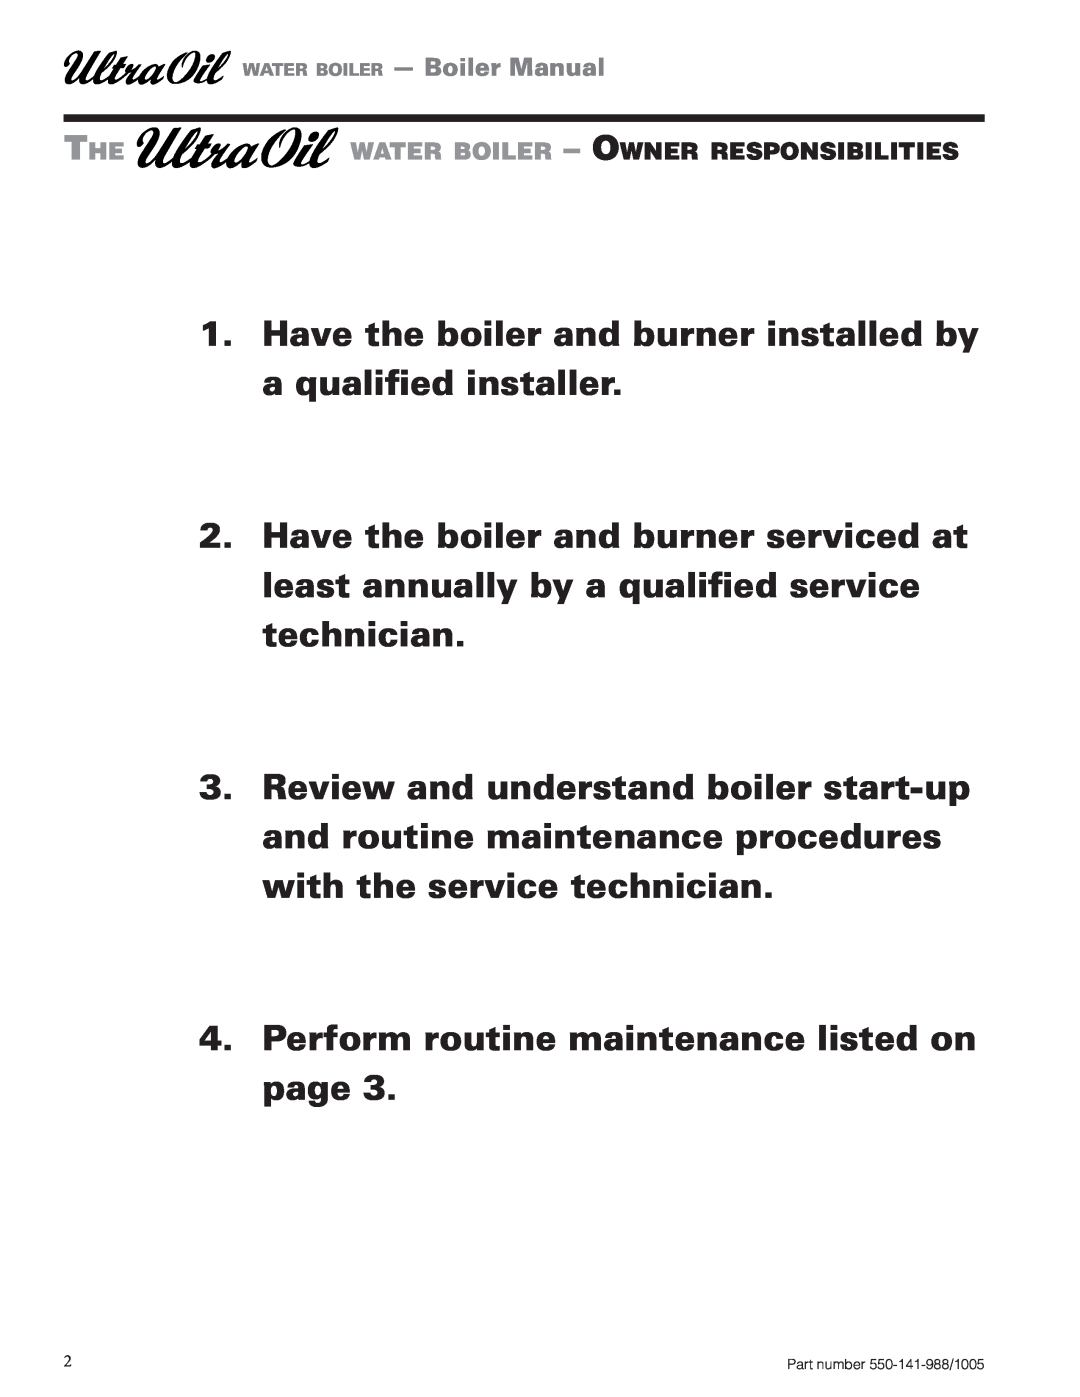 Weil-McLain Oil-Fired Water Boiler manual Perform routine maintenance listed on page 